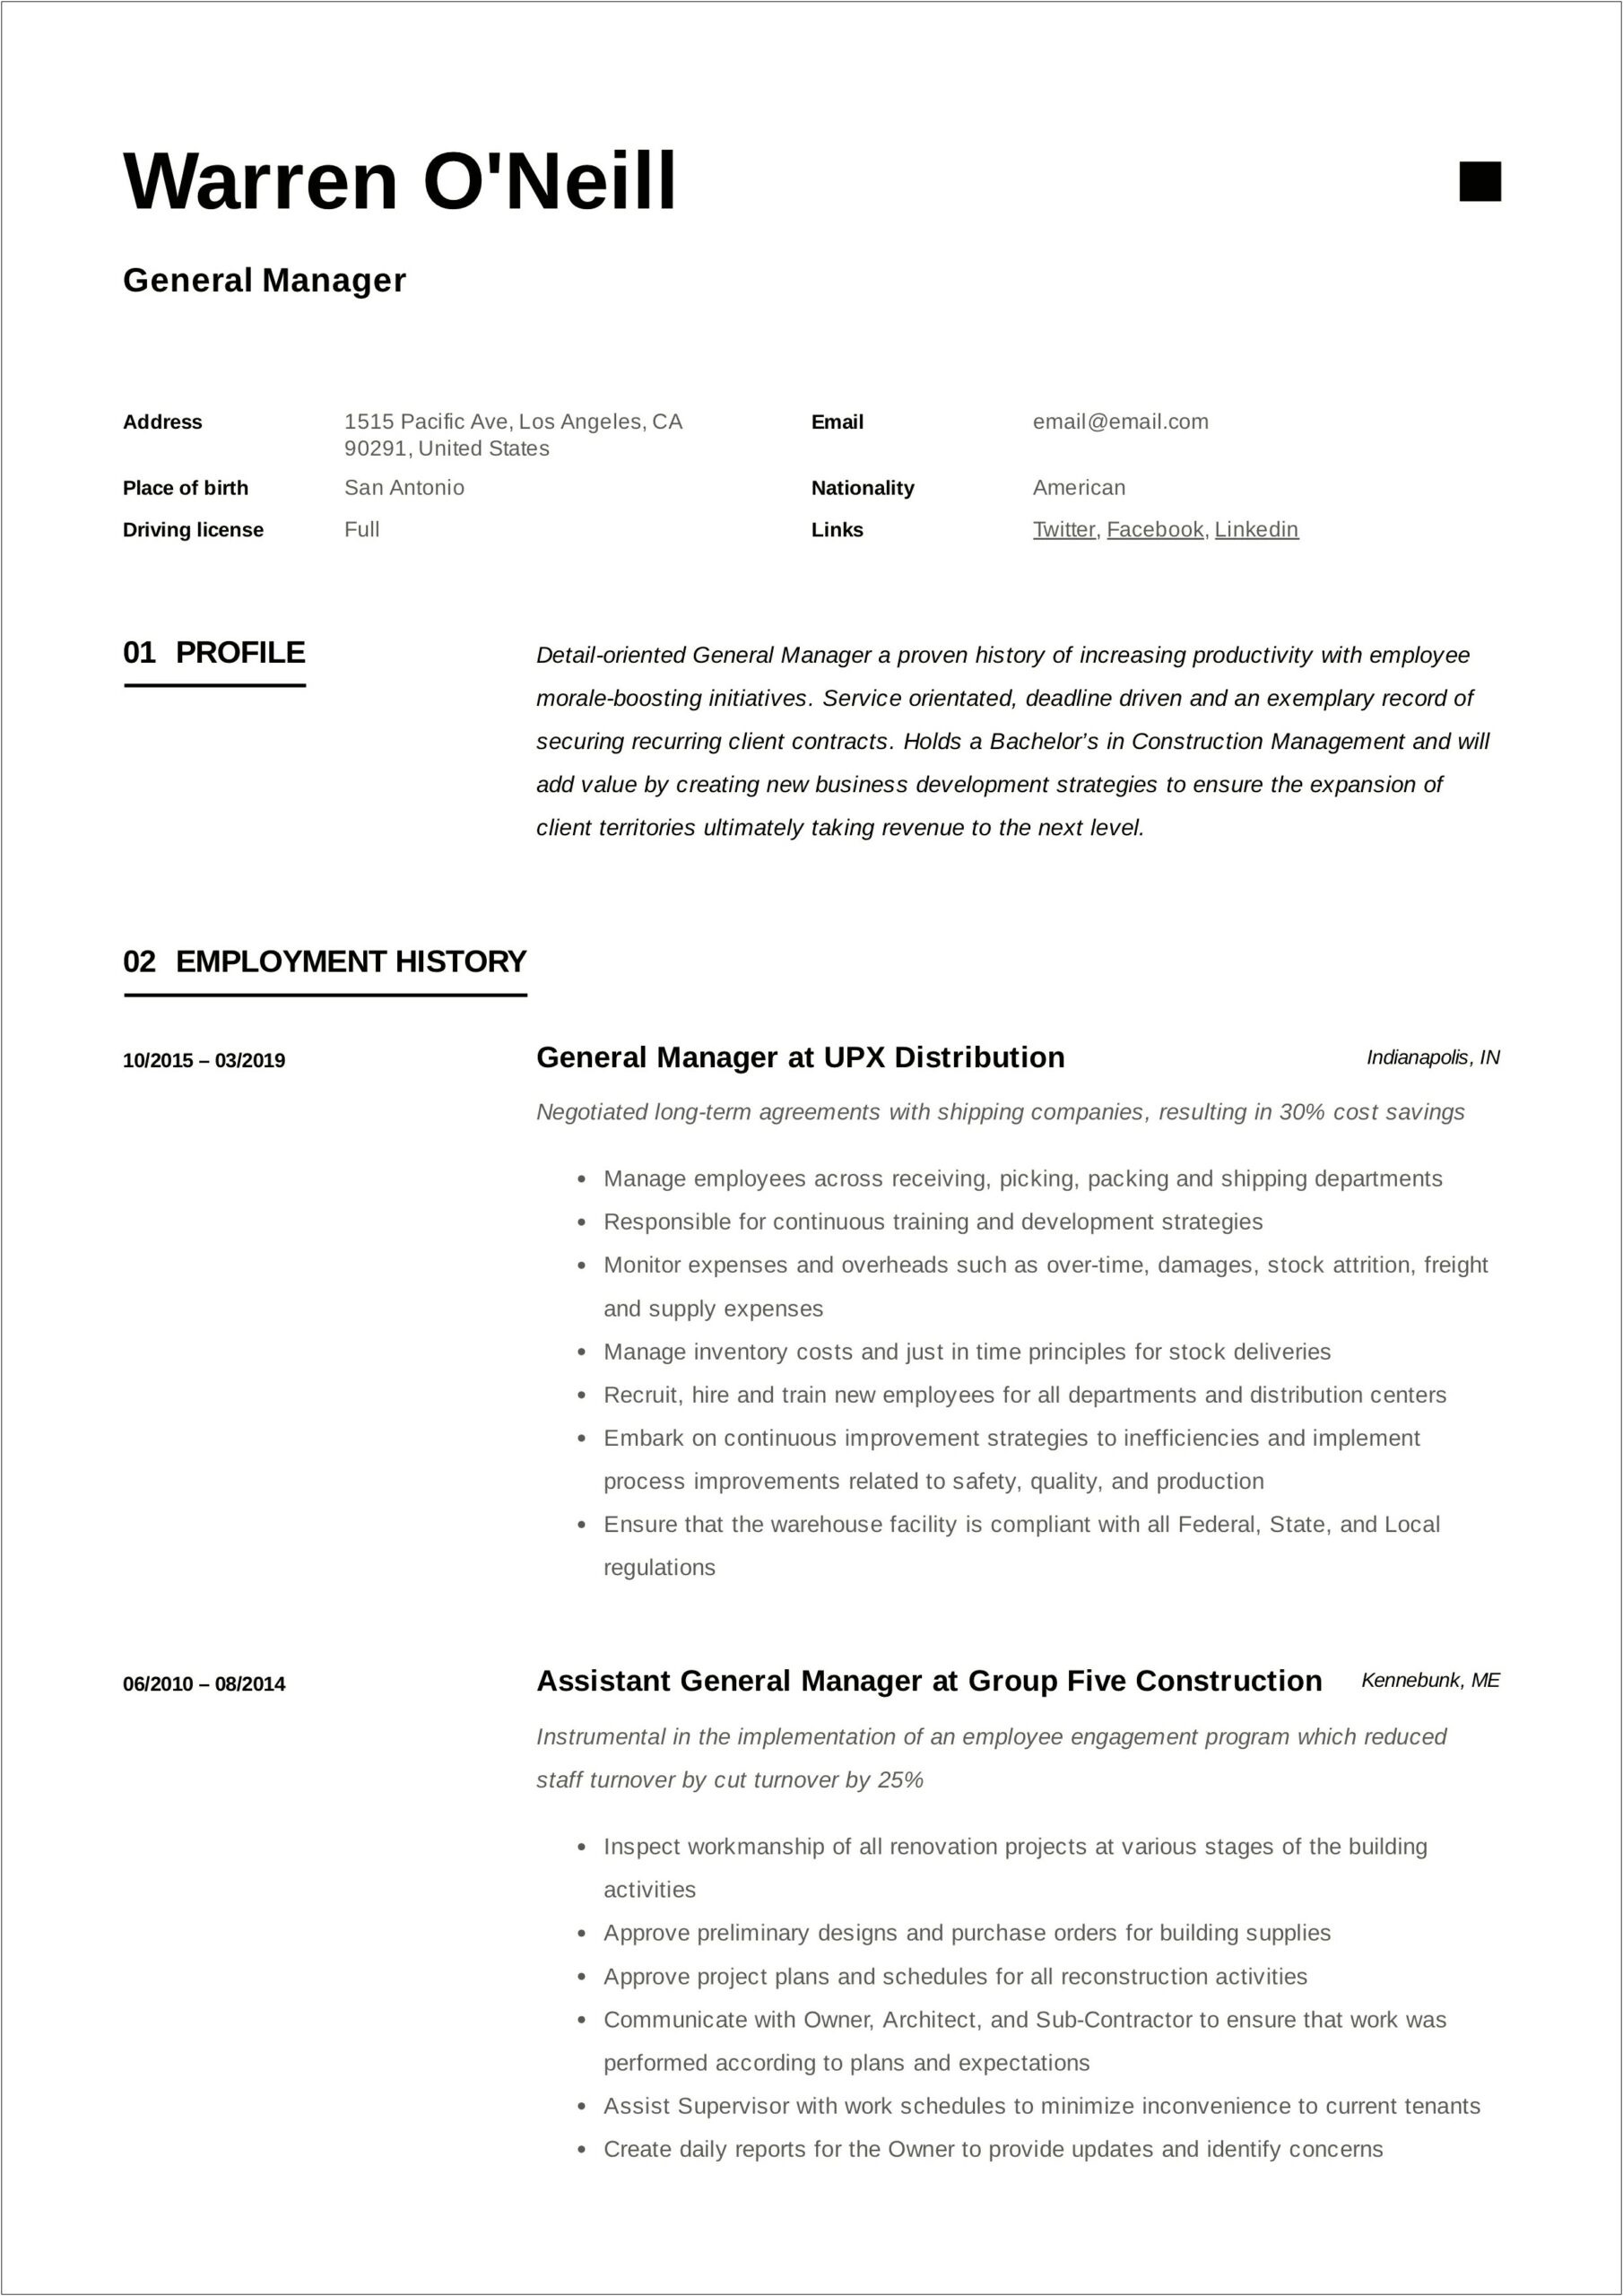 Latest Resume Format For Purchase Manager